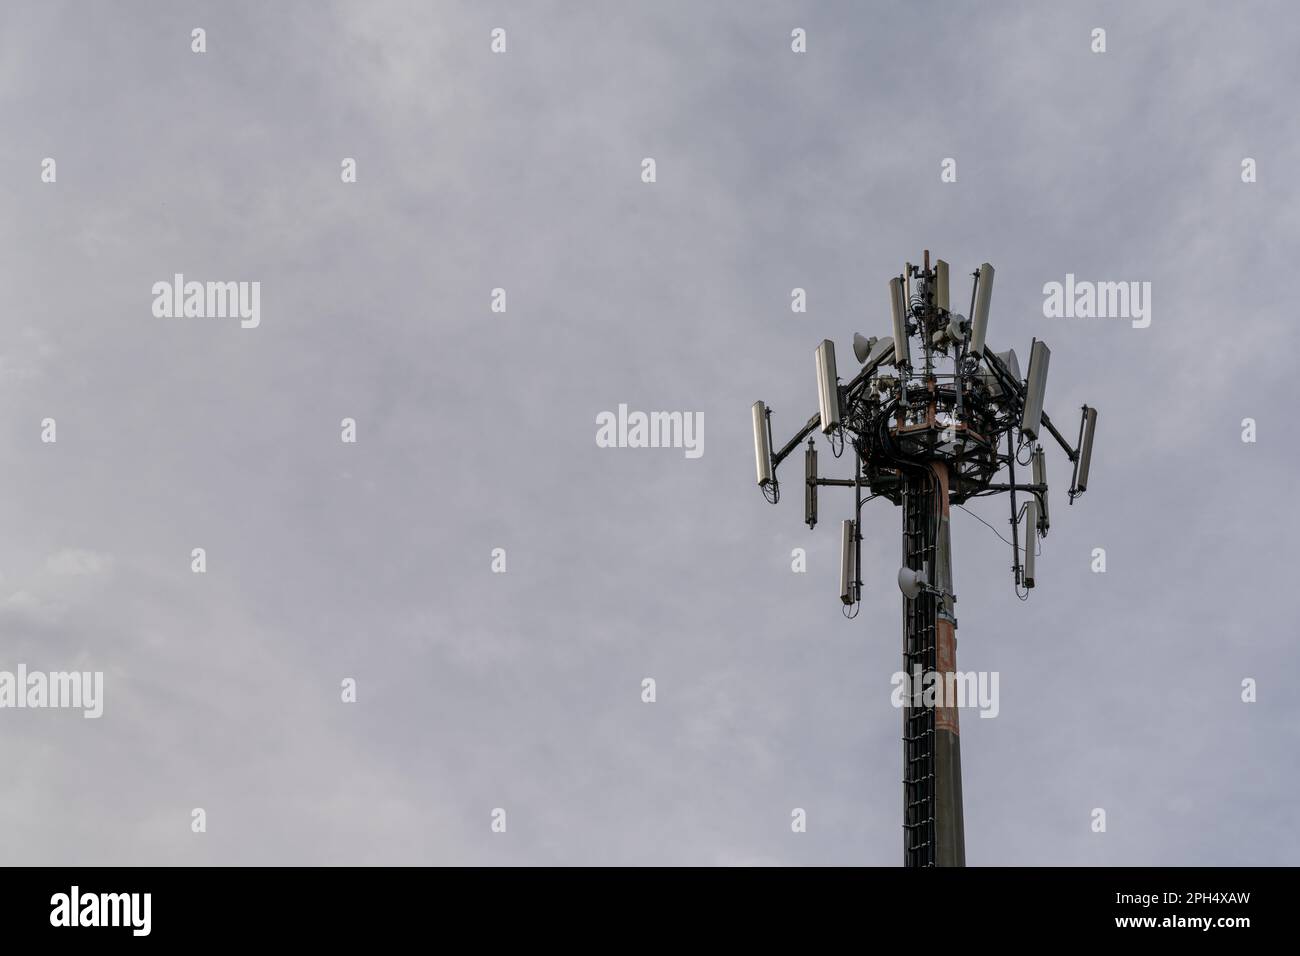 A close-up view of a cellphone and internet 5G antenna with overcast sky copy space Stock Photo